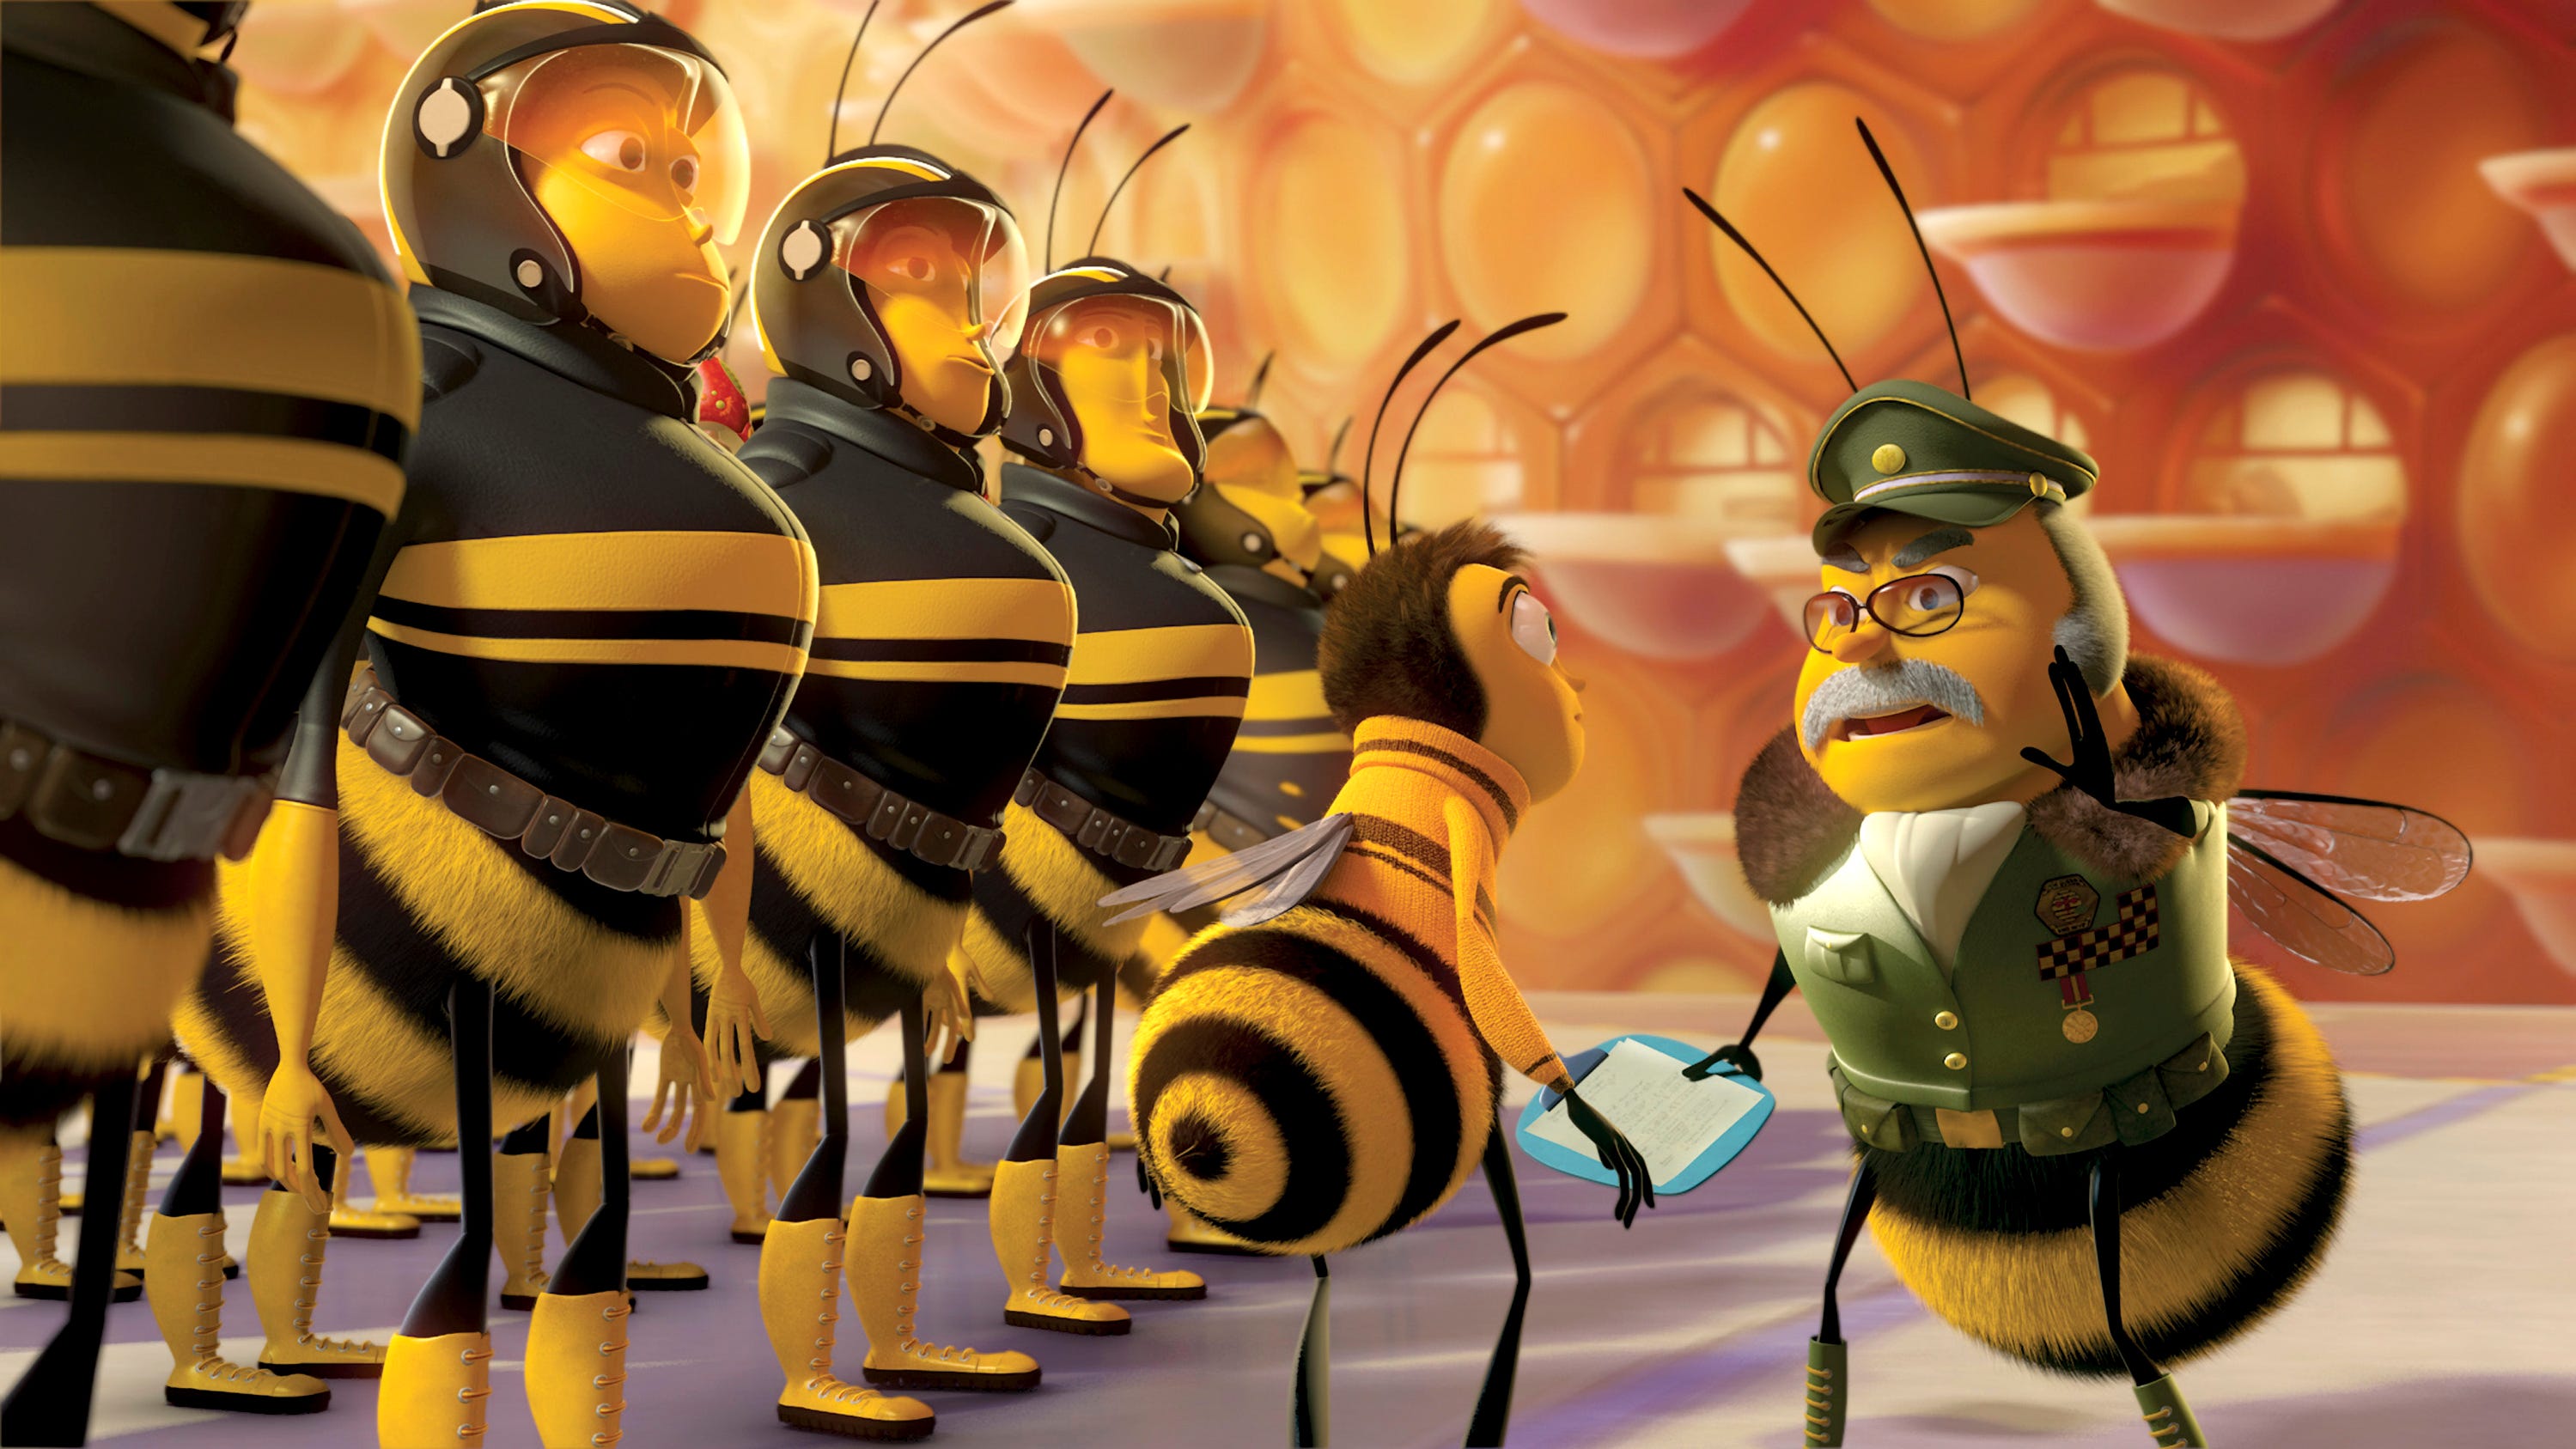 Fact Check Donald Trump Inaugural Address Not Stolen From Bee Movie